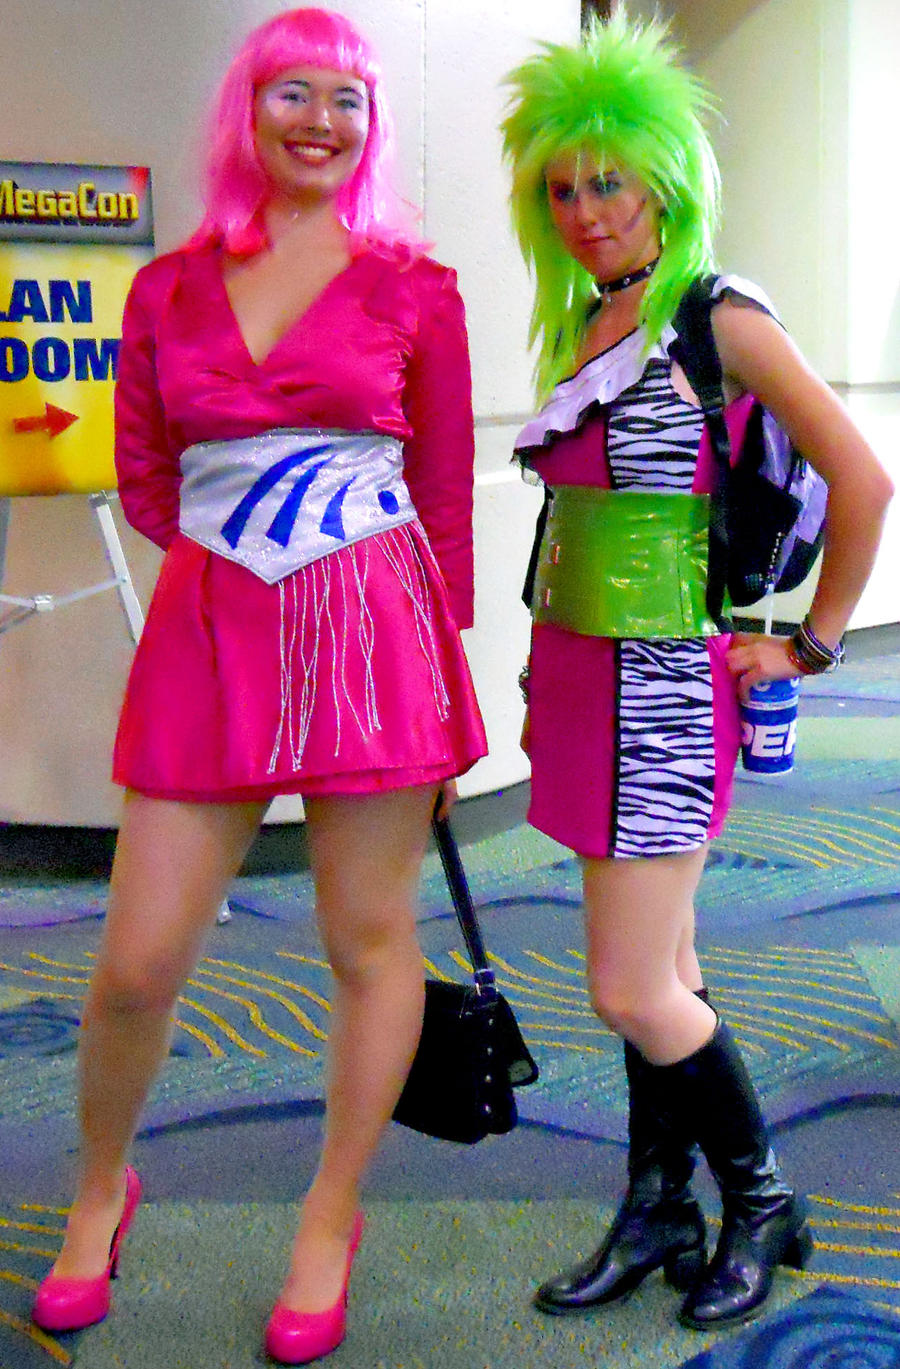 and the holograms cosplay Jem